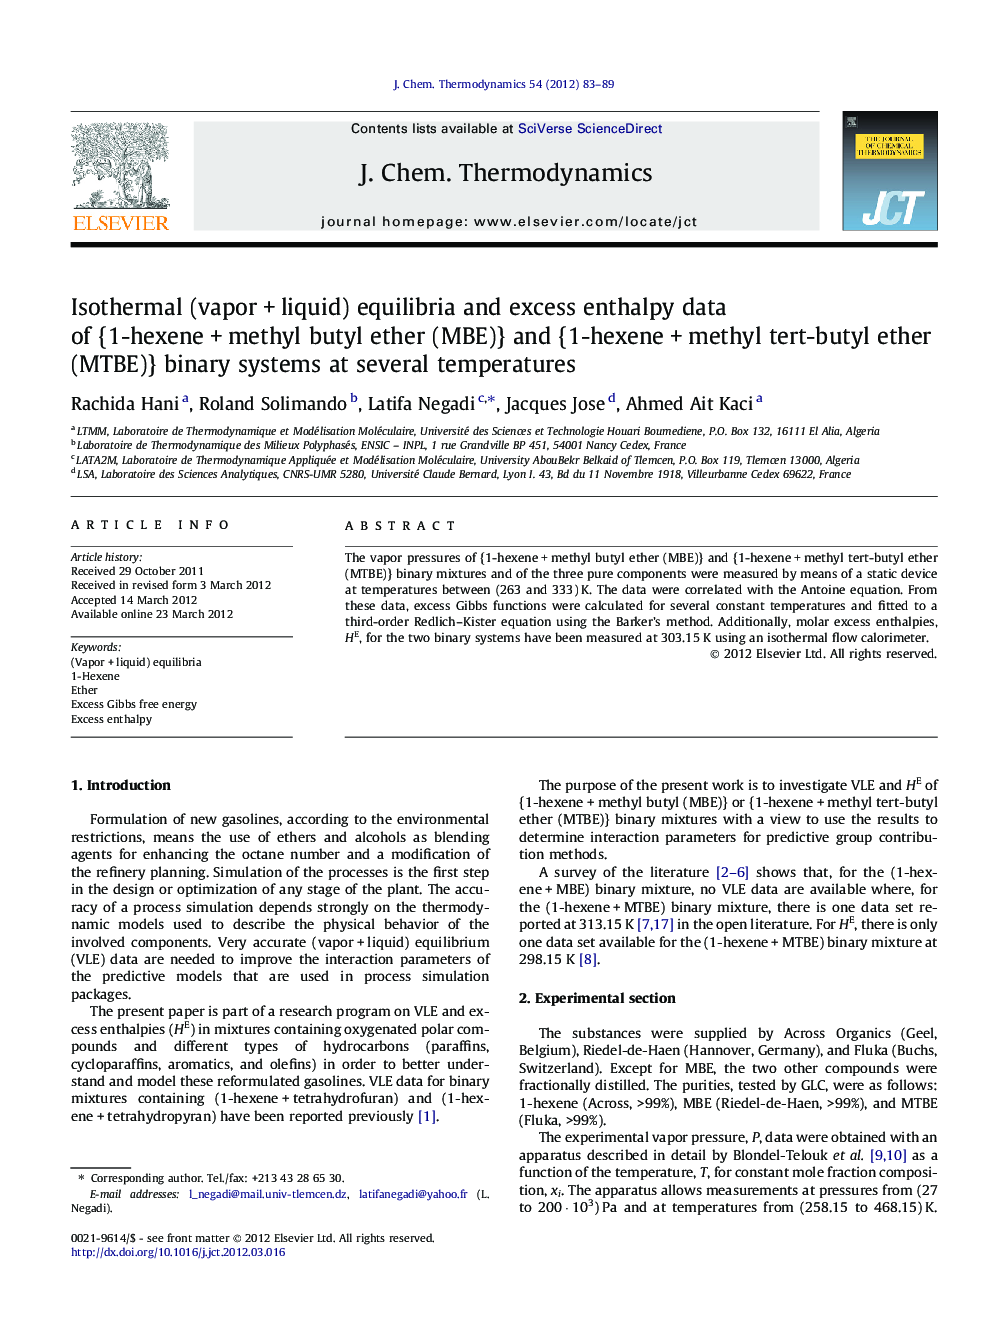 Isothermal (vapor + liquid) equilibria and excess enthalpy data of {1-hexene + methyl butyl ether (MBE)} and {1-hexene + methyl tert-butyl ether (MTBE)} binary systems at several temperatures